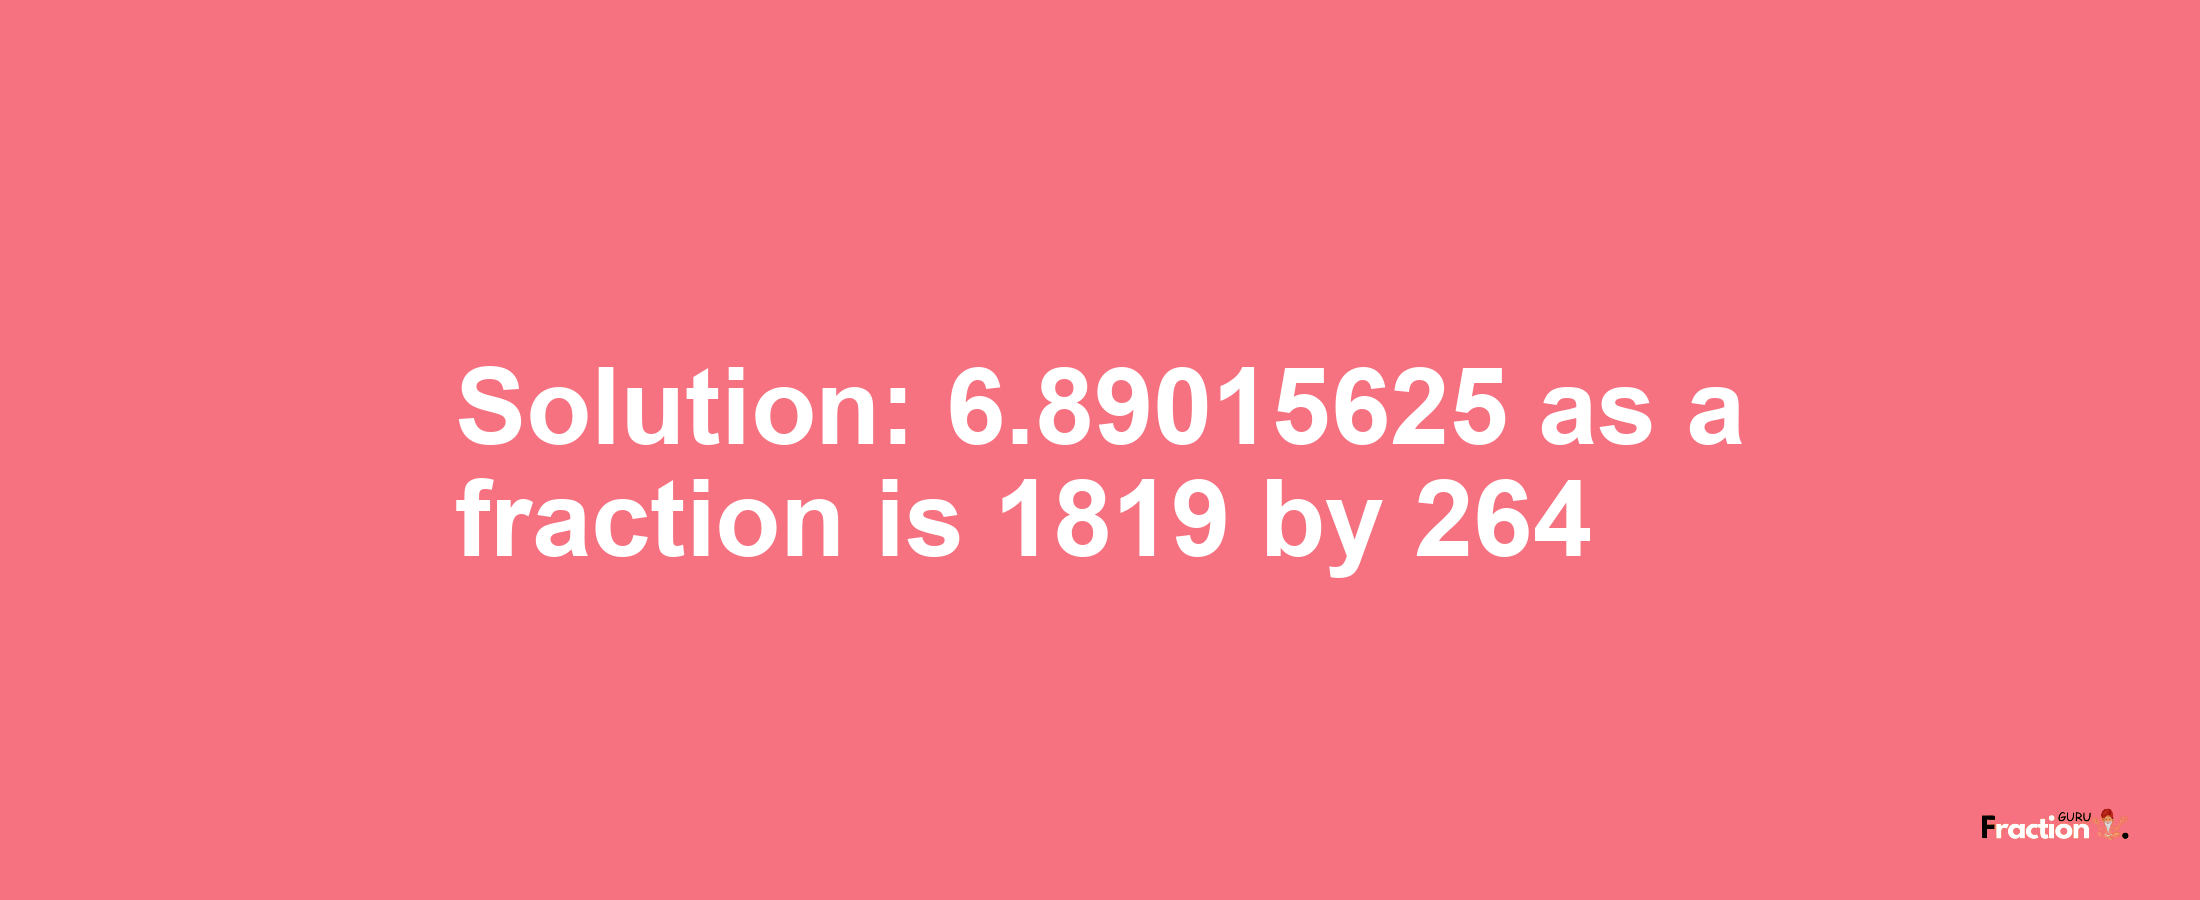 Solution:6.89015625 as a fraction is 1819/264